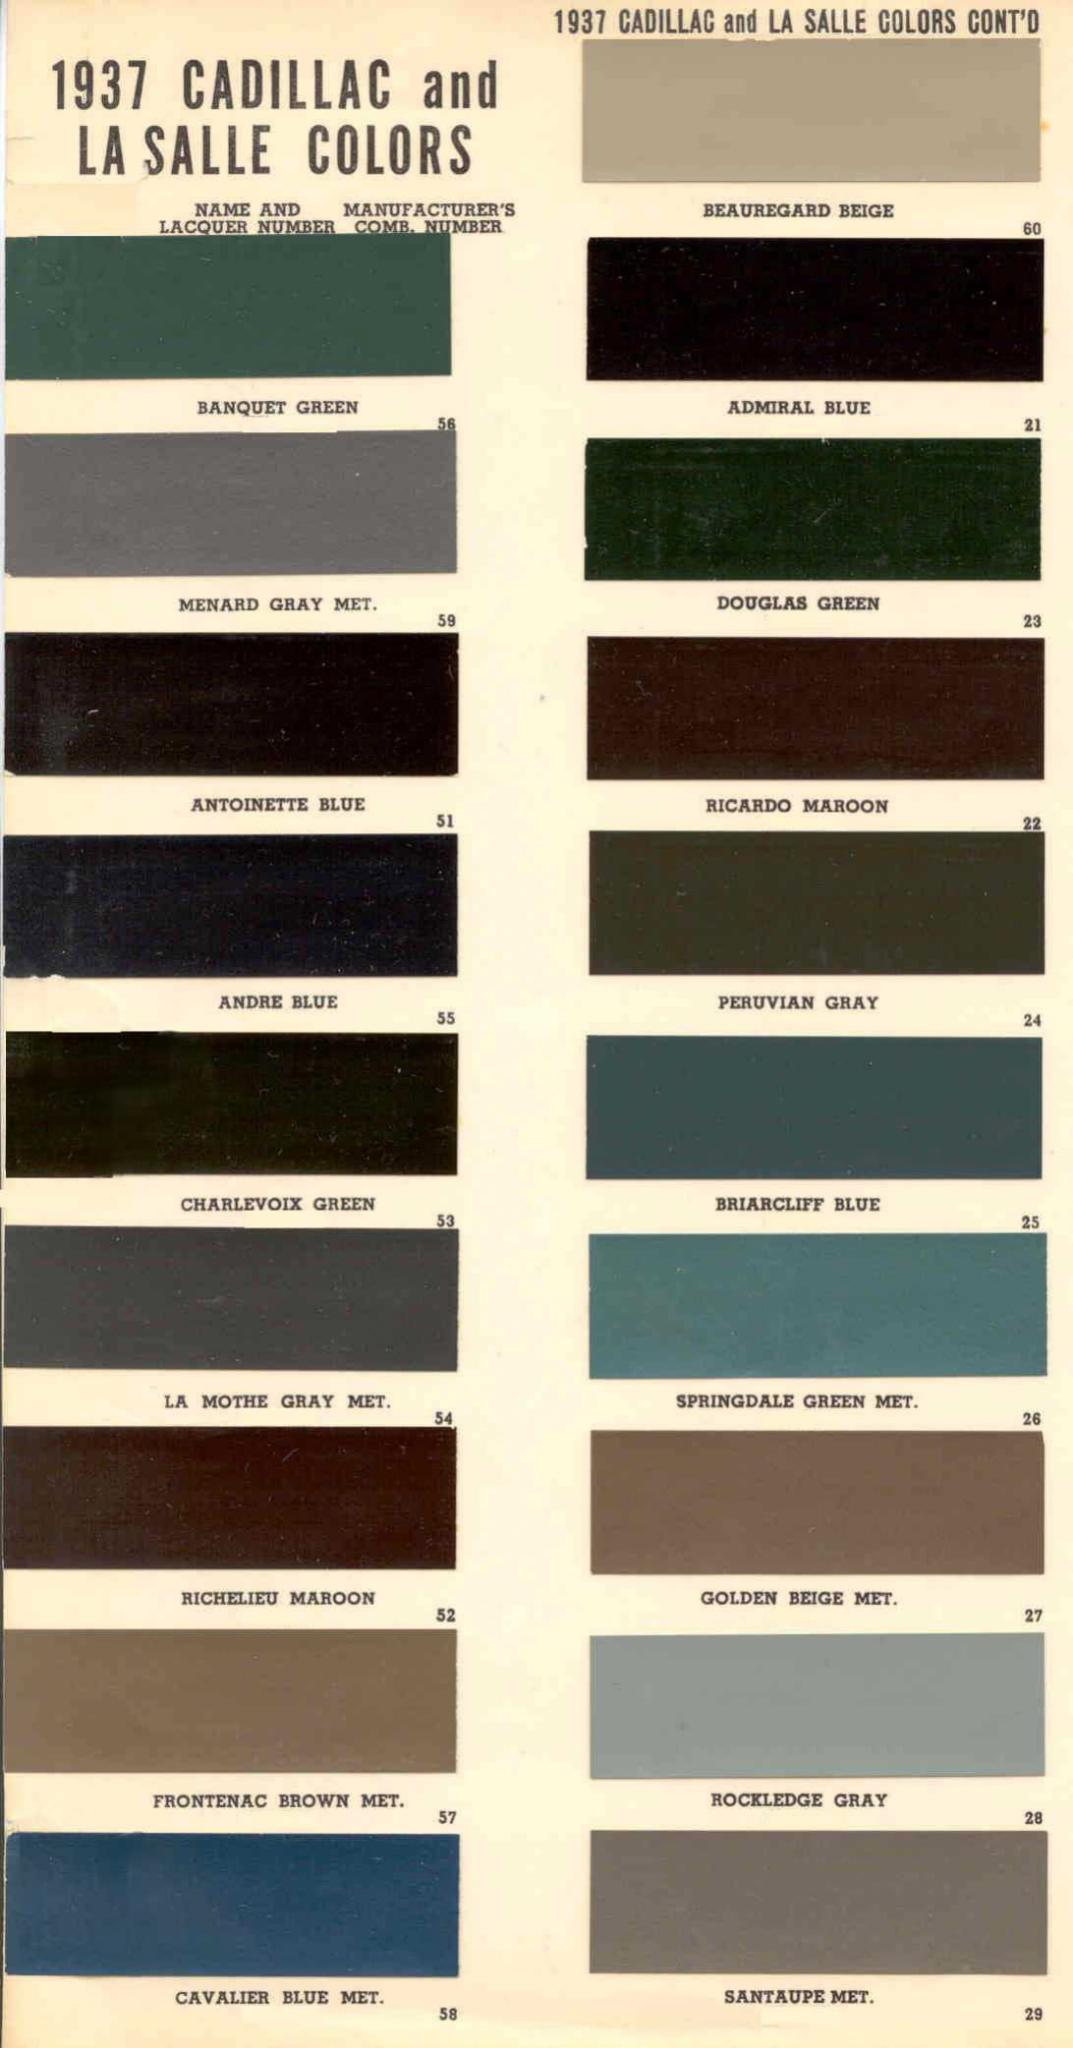 Exterior Colors and thier codes used in 1937 on Cadillac and Lasalle vehicles